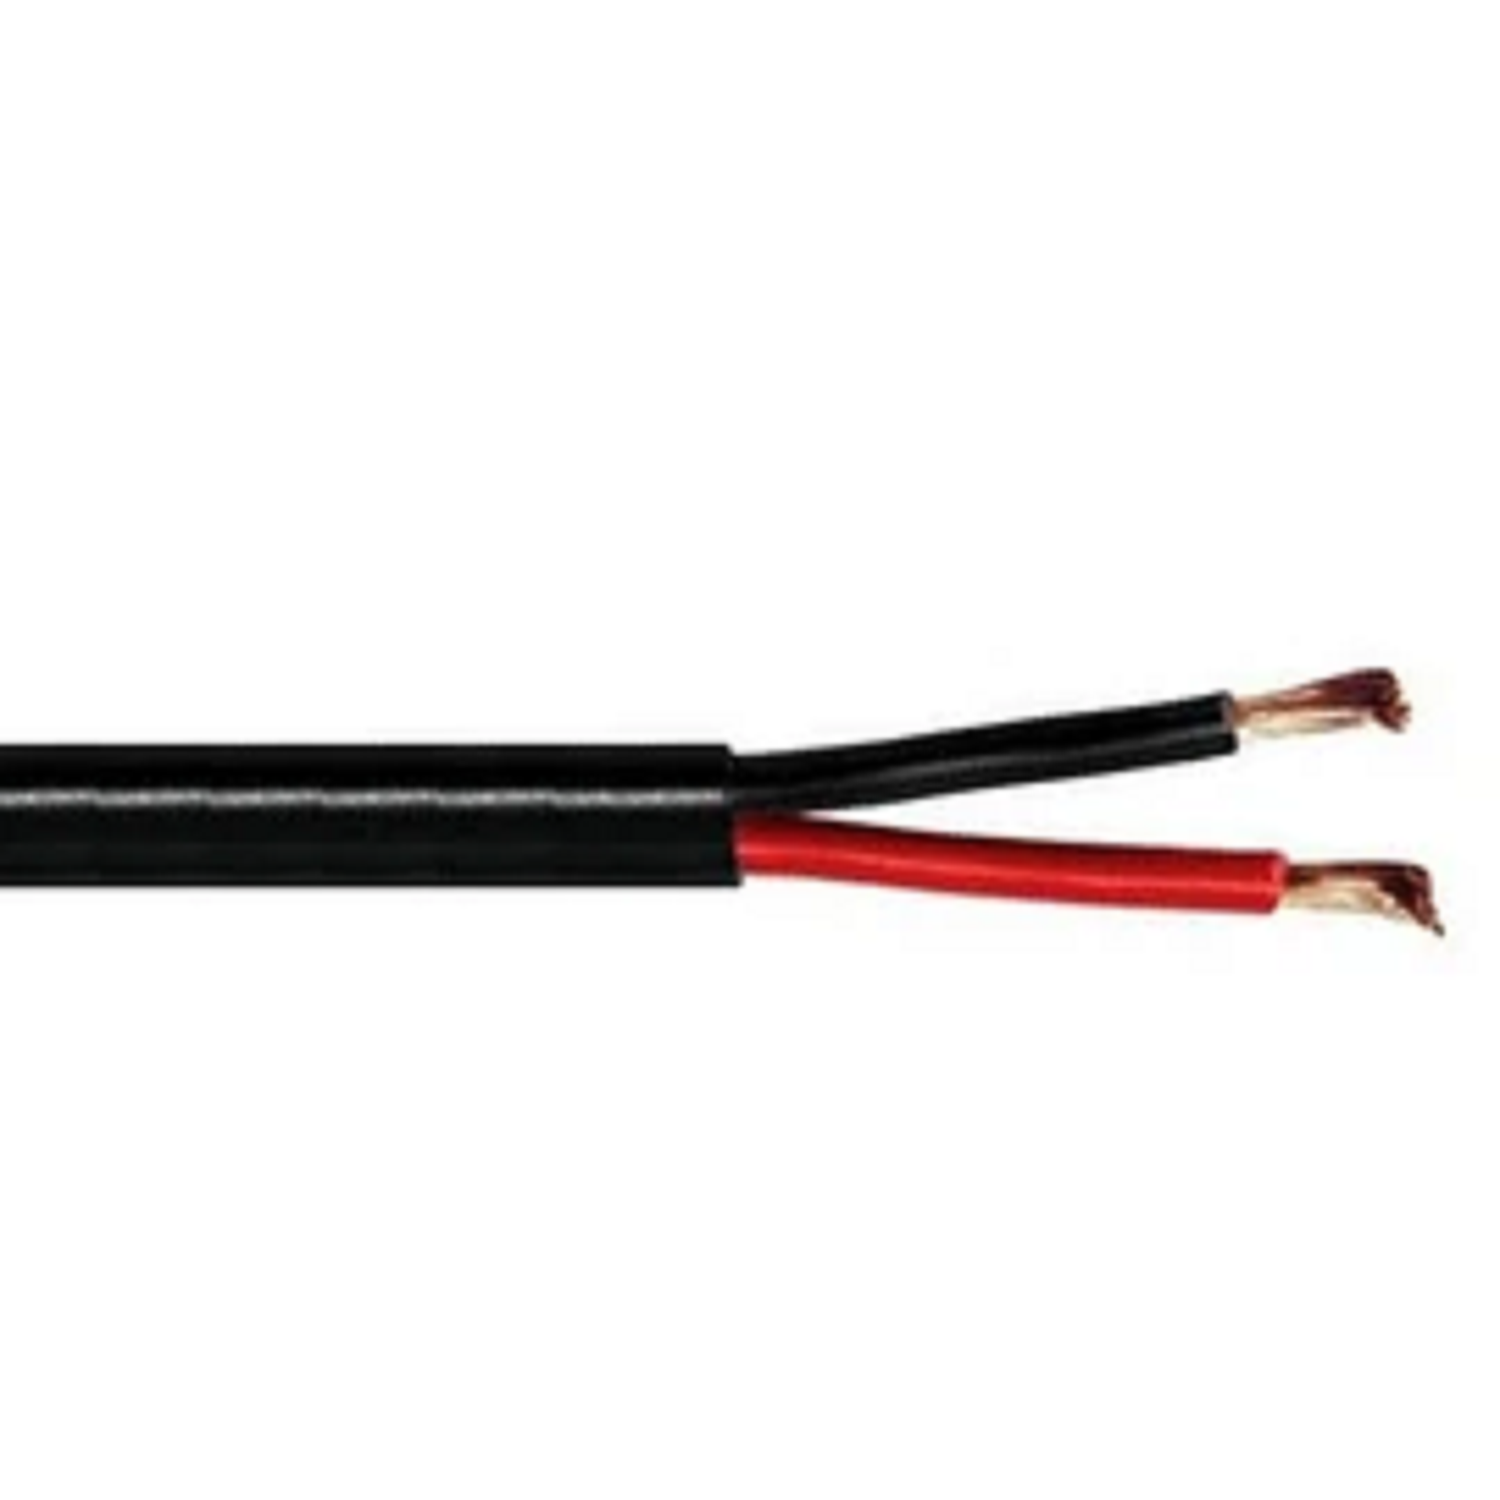 2.5 Sqmm Polycab Copper Flexible Cable (11 KV) With PVC Insulated Sheathed - Black